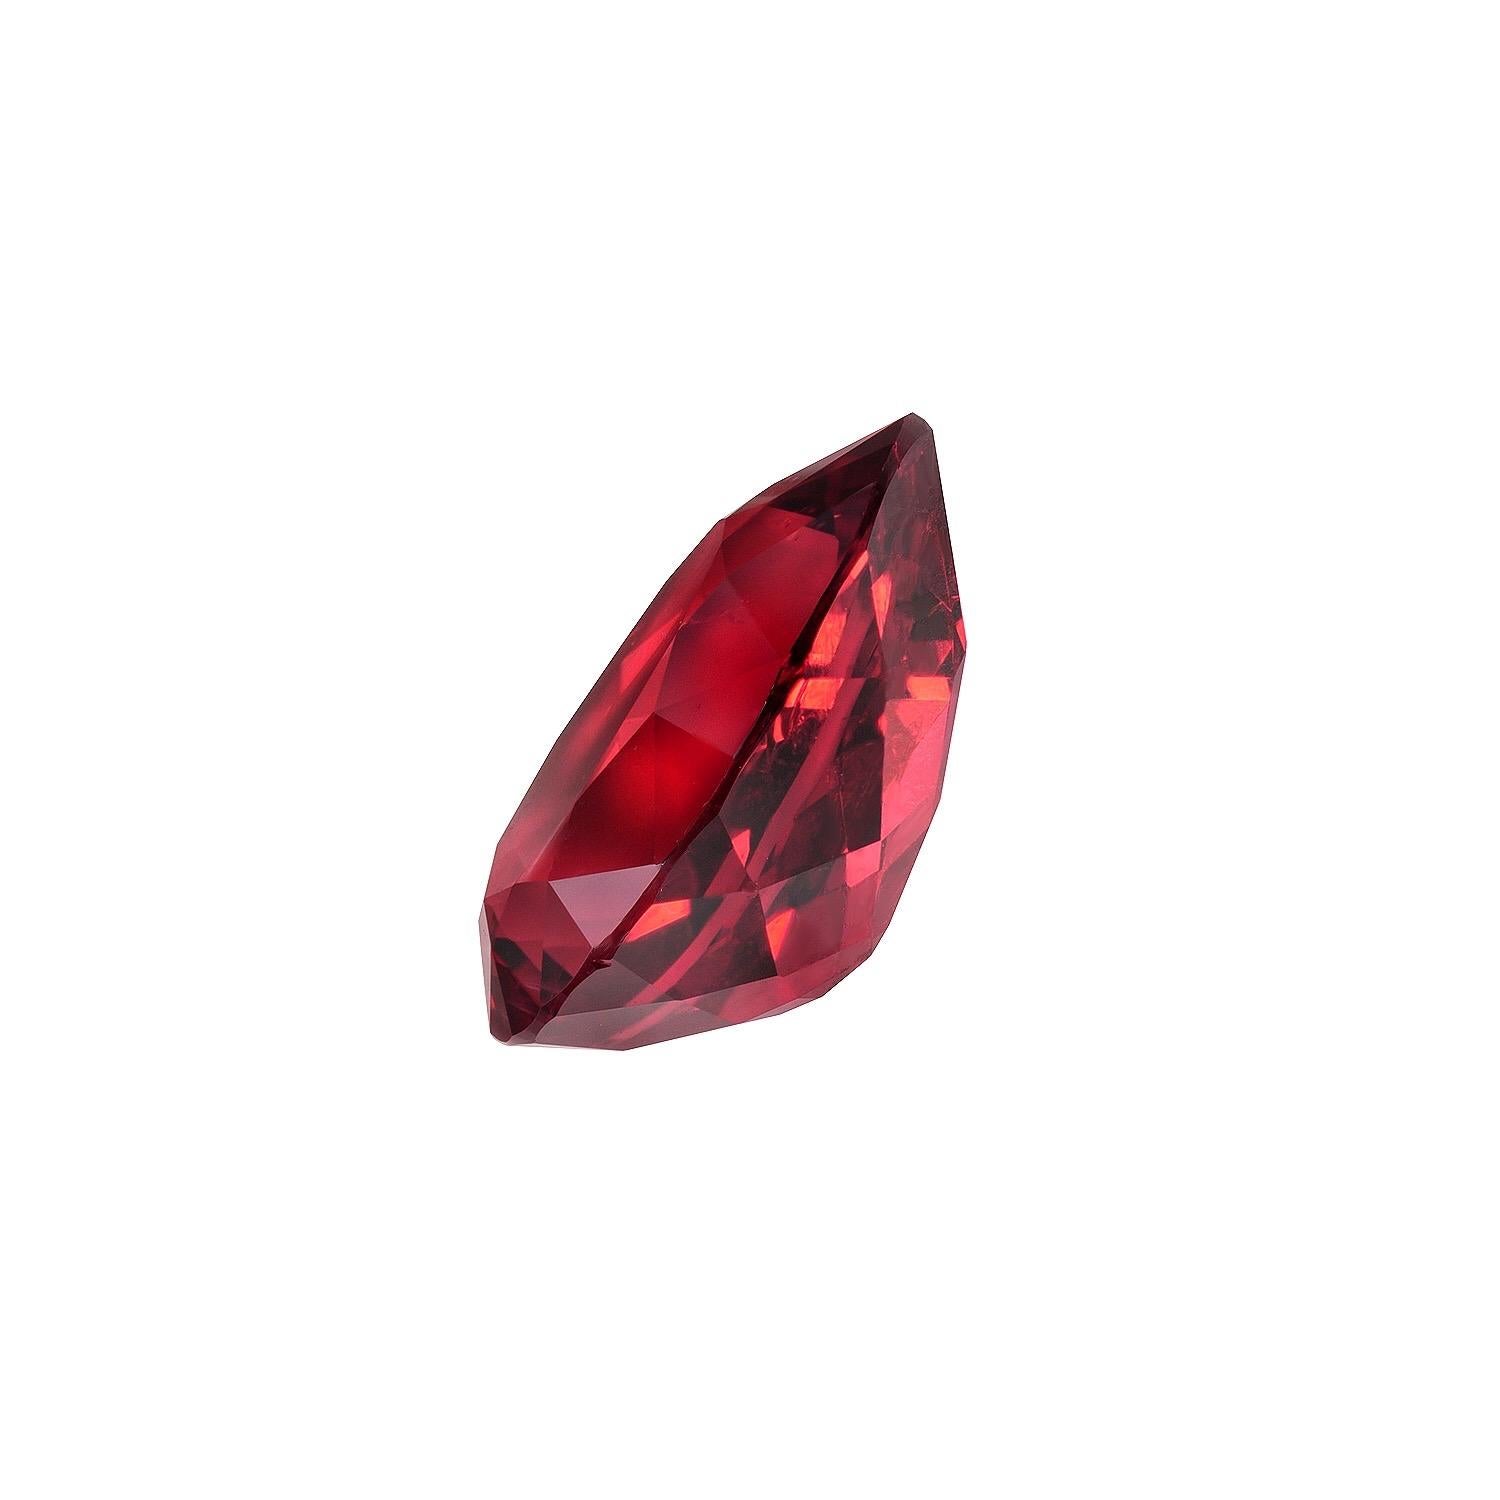 Very special 2.96 carat Red Spinel pear shape gem, from Mahenge Tanzania, offered loose to a world-class gemstone lover.
Returns are accepted and paid by us within 7 days of delivery.
We offer supreme custom jewelry work upon request. Please contact